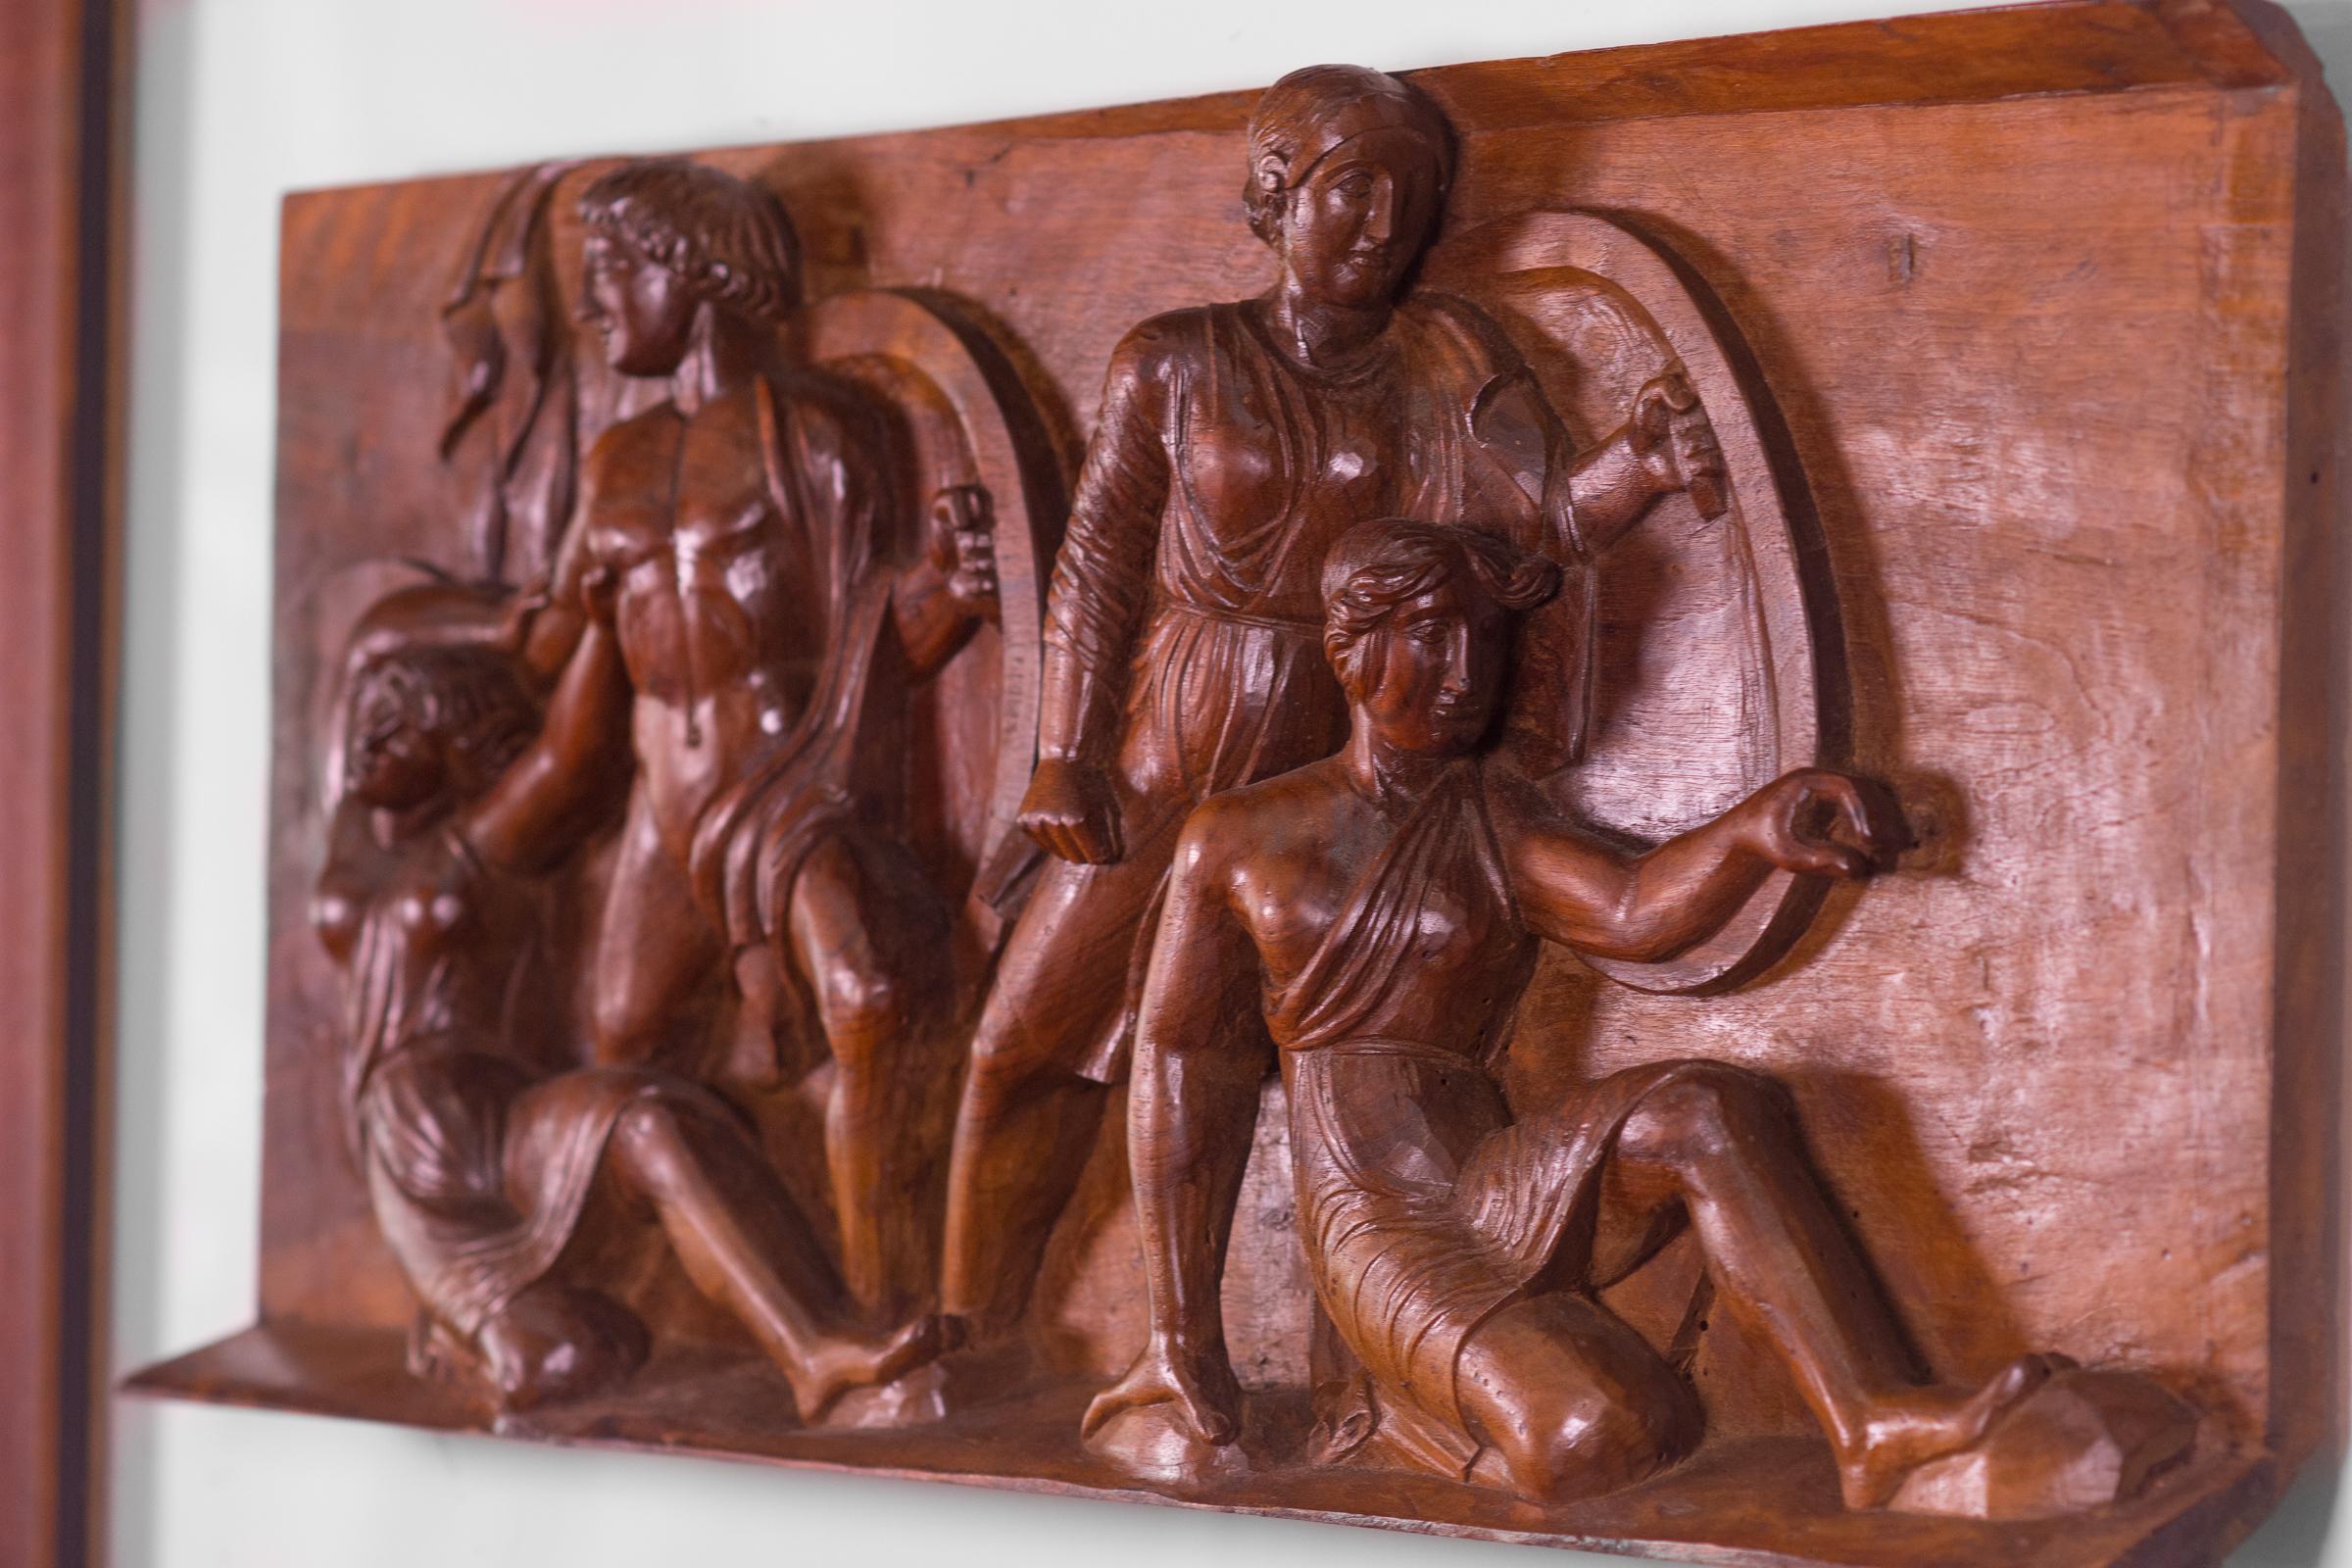 1920s French walnut carved-wood panel of part of the Frieze of the Parthenon. It shows the procession of the Panathenaic festival, the commemoration of the birthday of the Goddess Athena. The piece is mounted on a Lucite panel and framed with two